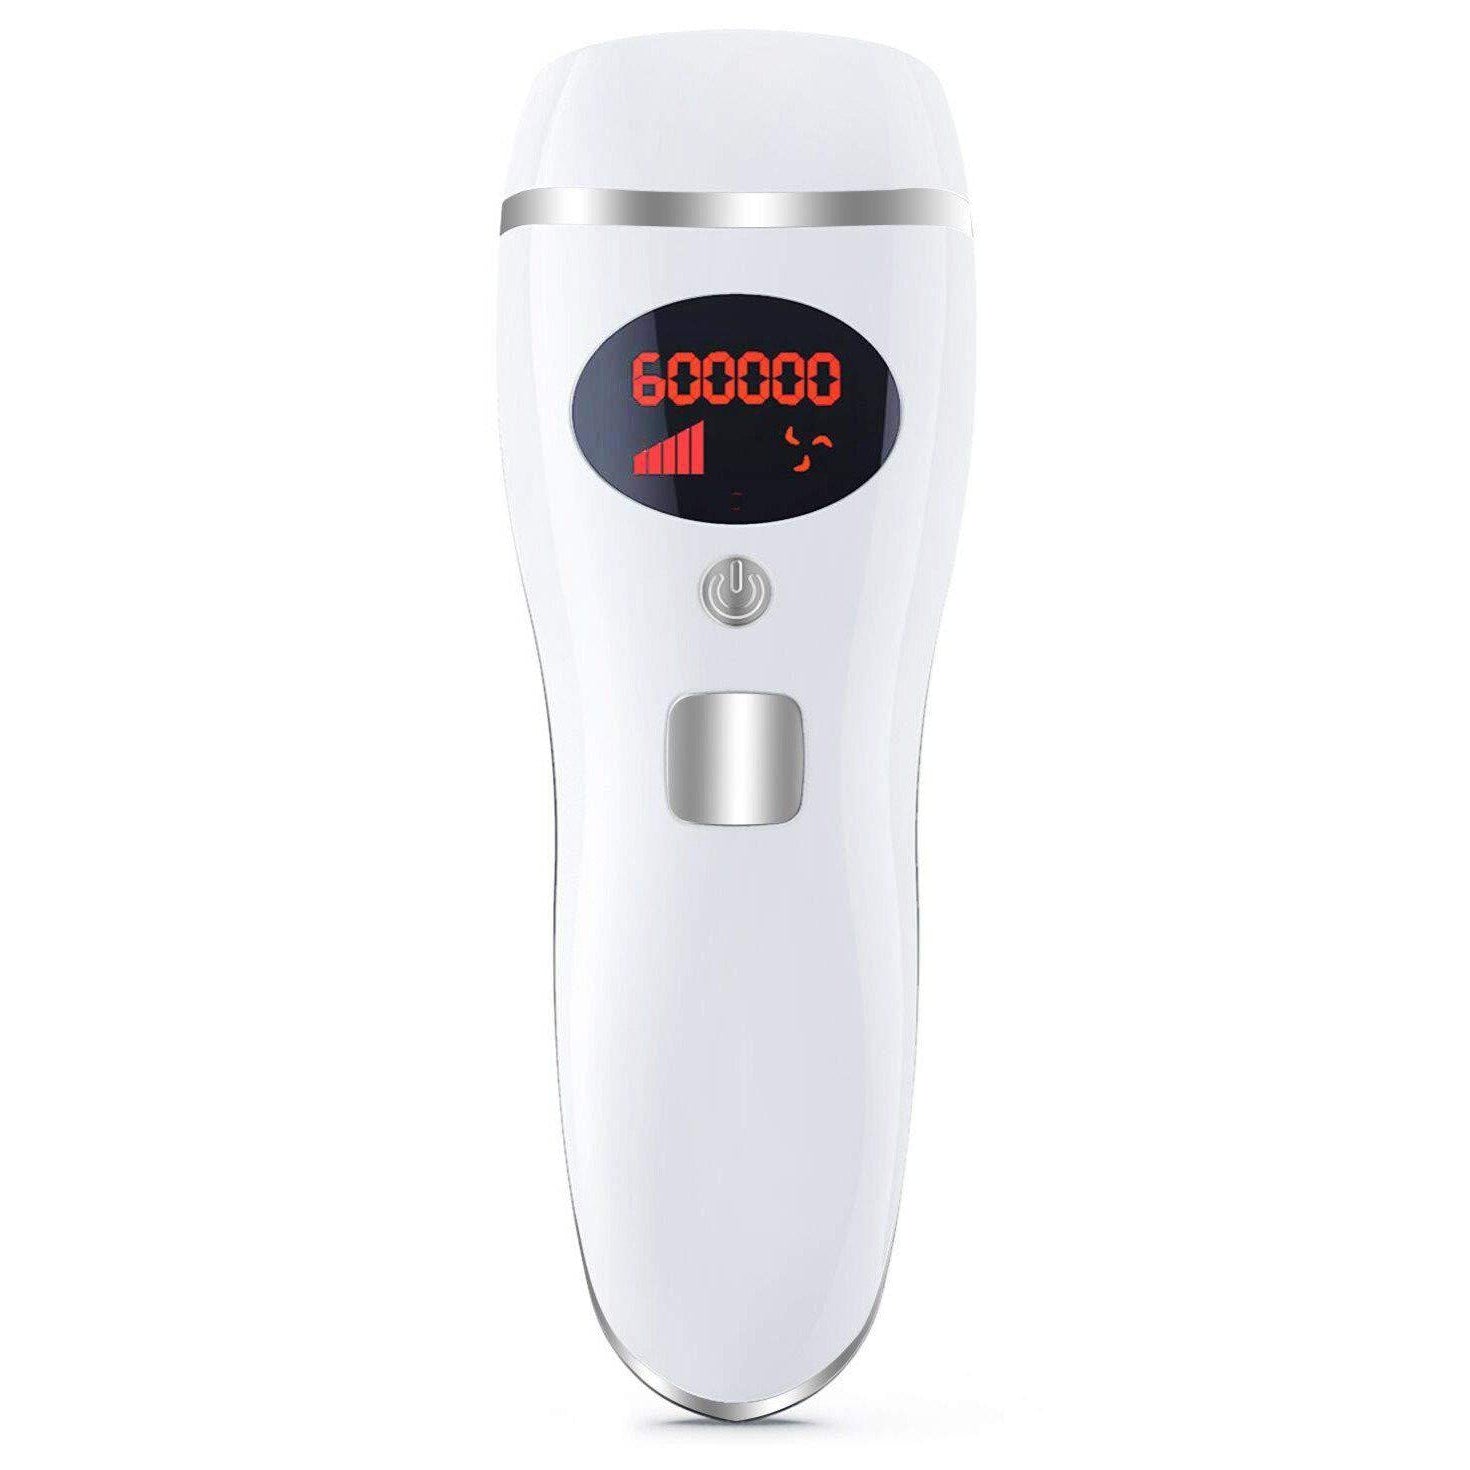 Aminzer IPL-D19 Permanent IPL Hair Removal System, White